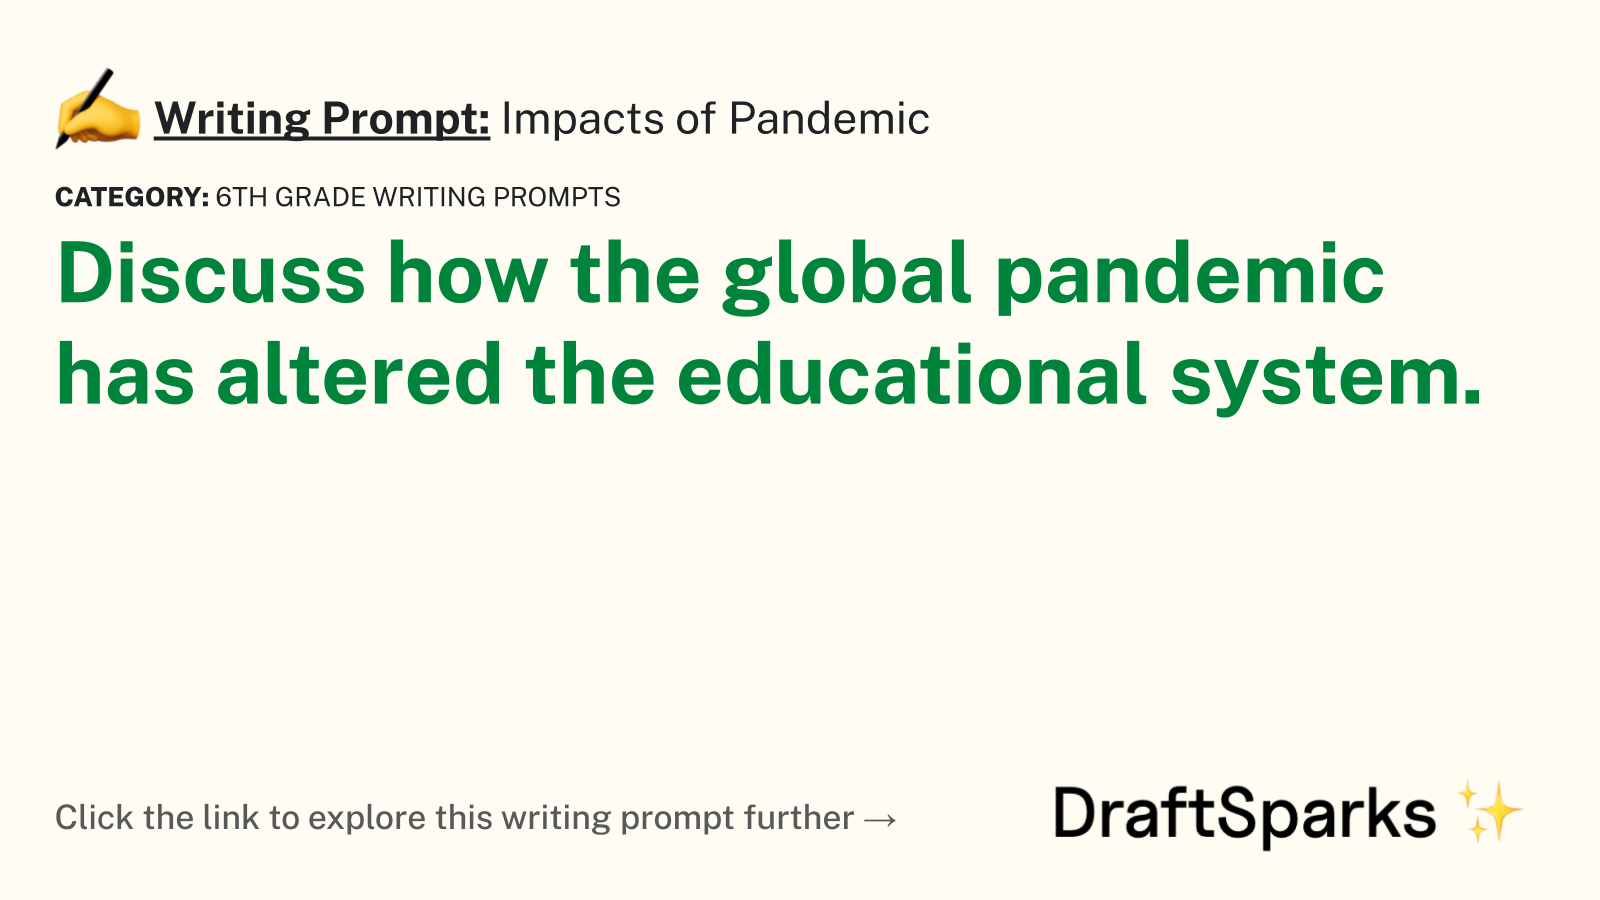 Impacts of Pandemic